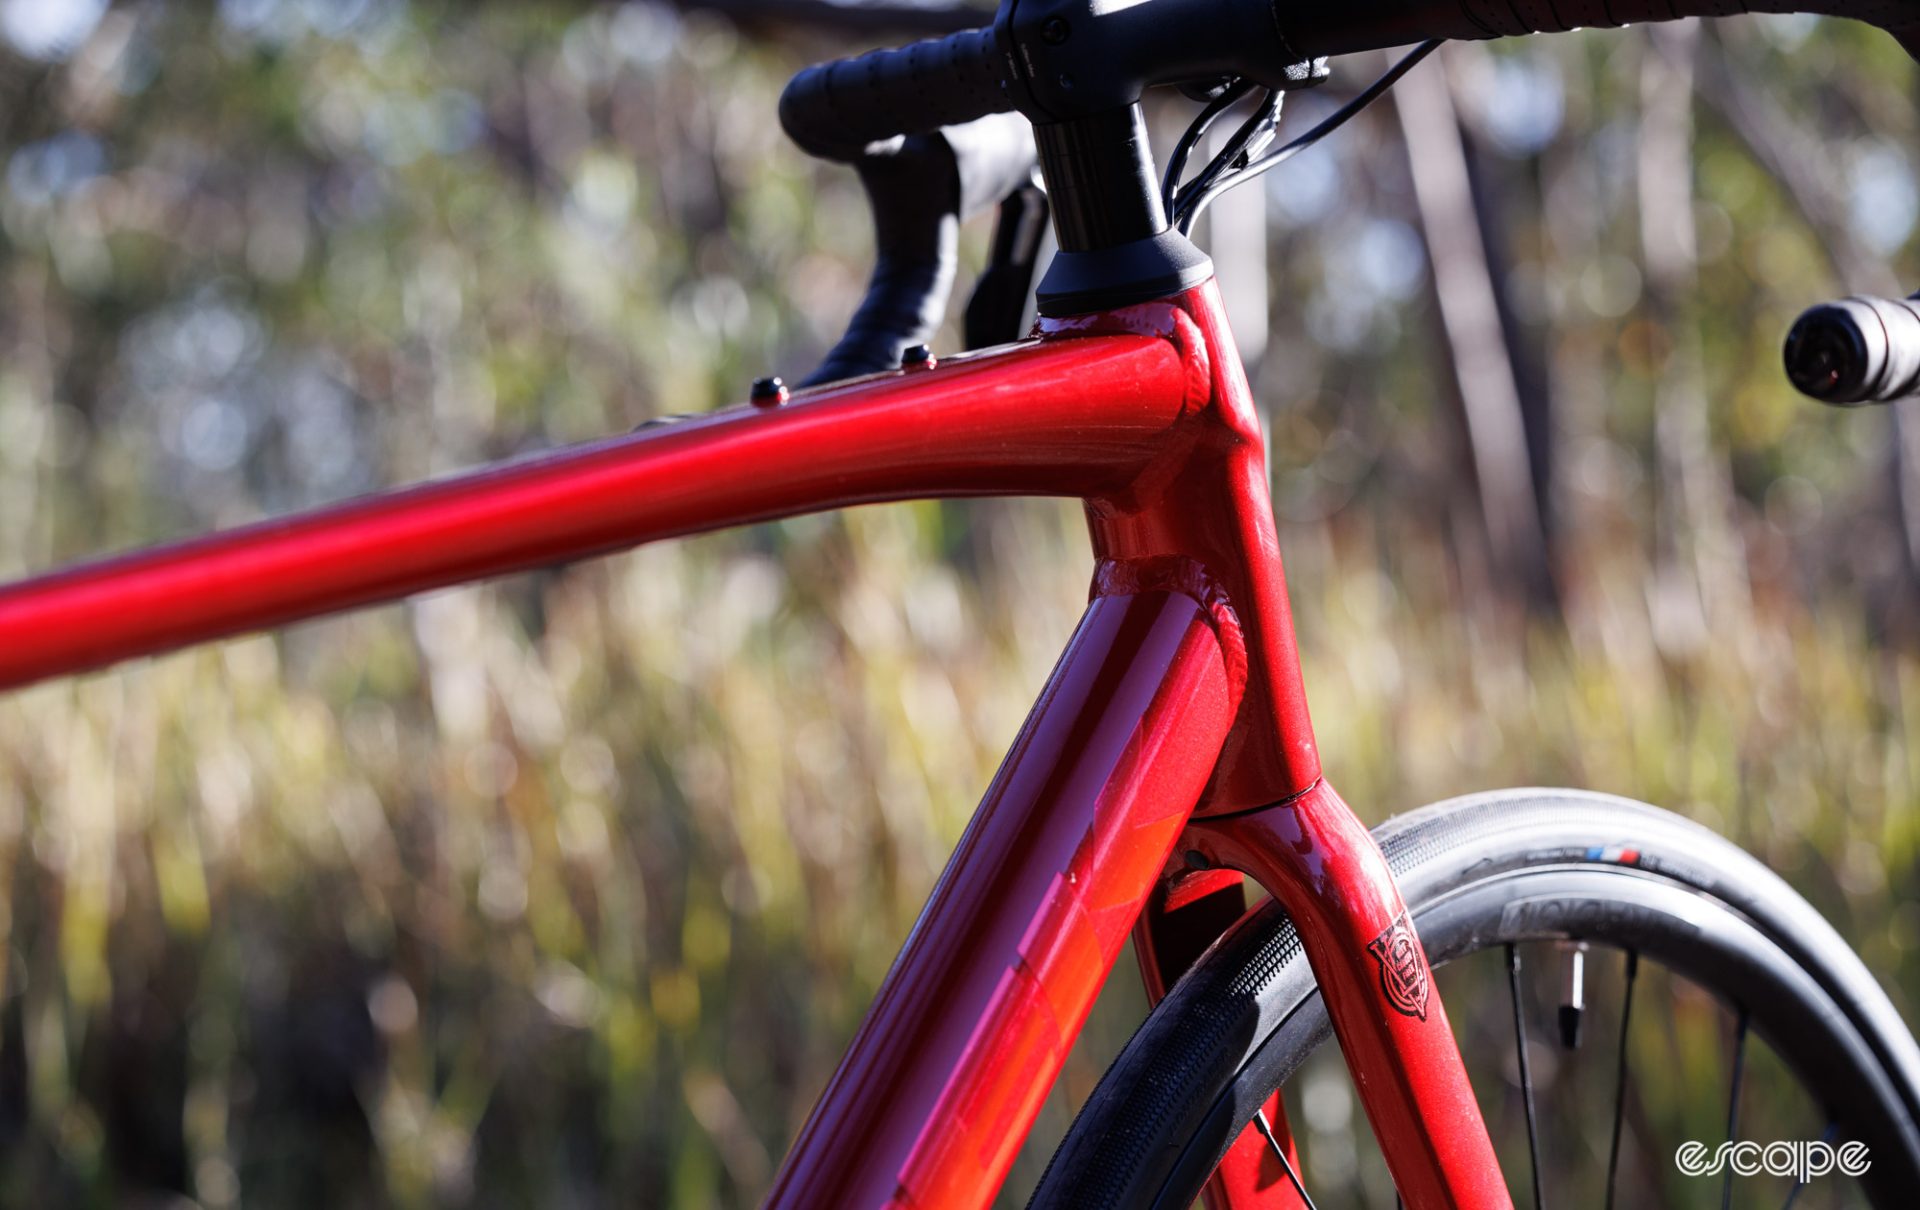 An image showing the candy red paint and shapely front to the bike. 